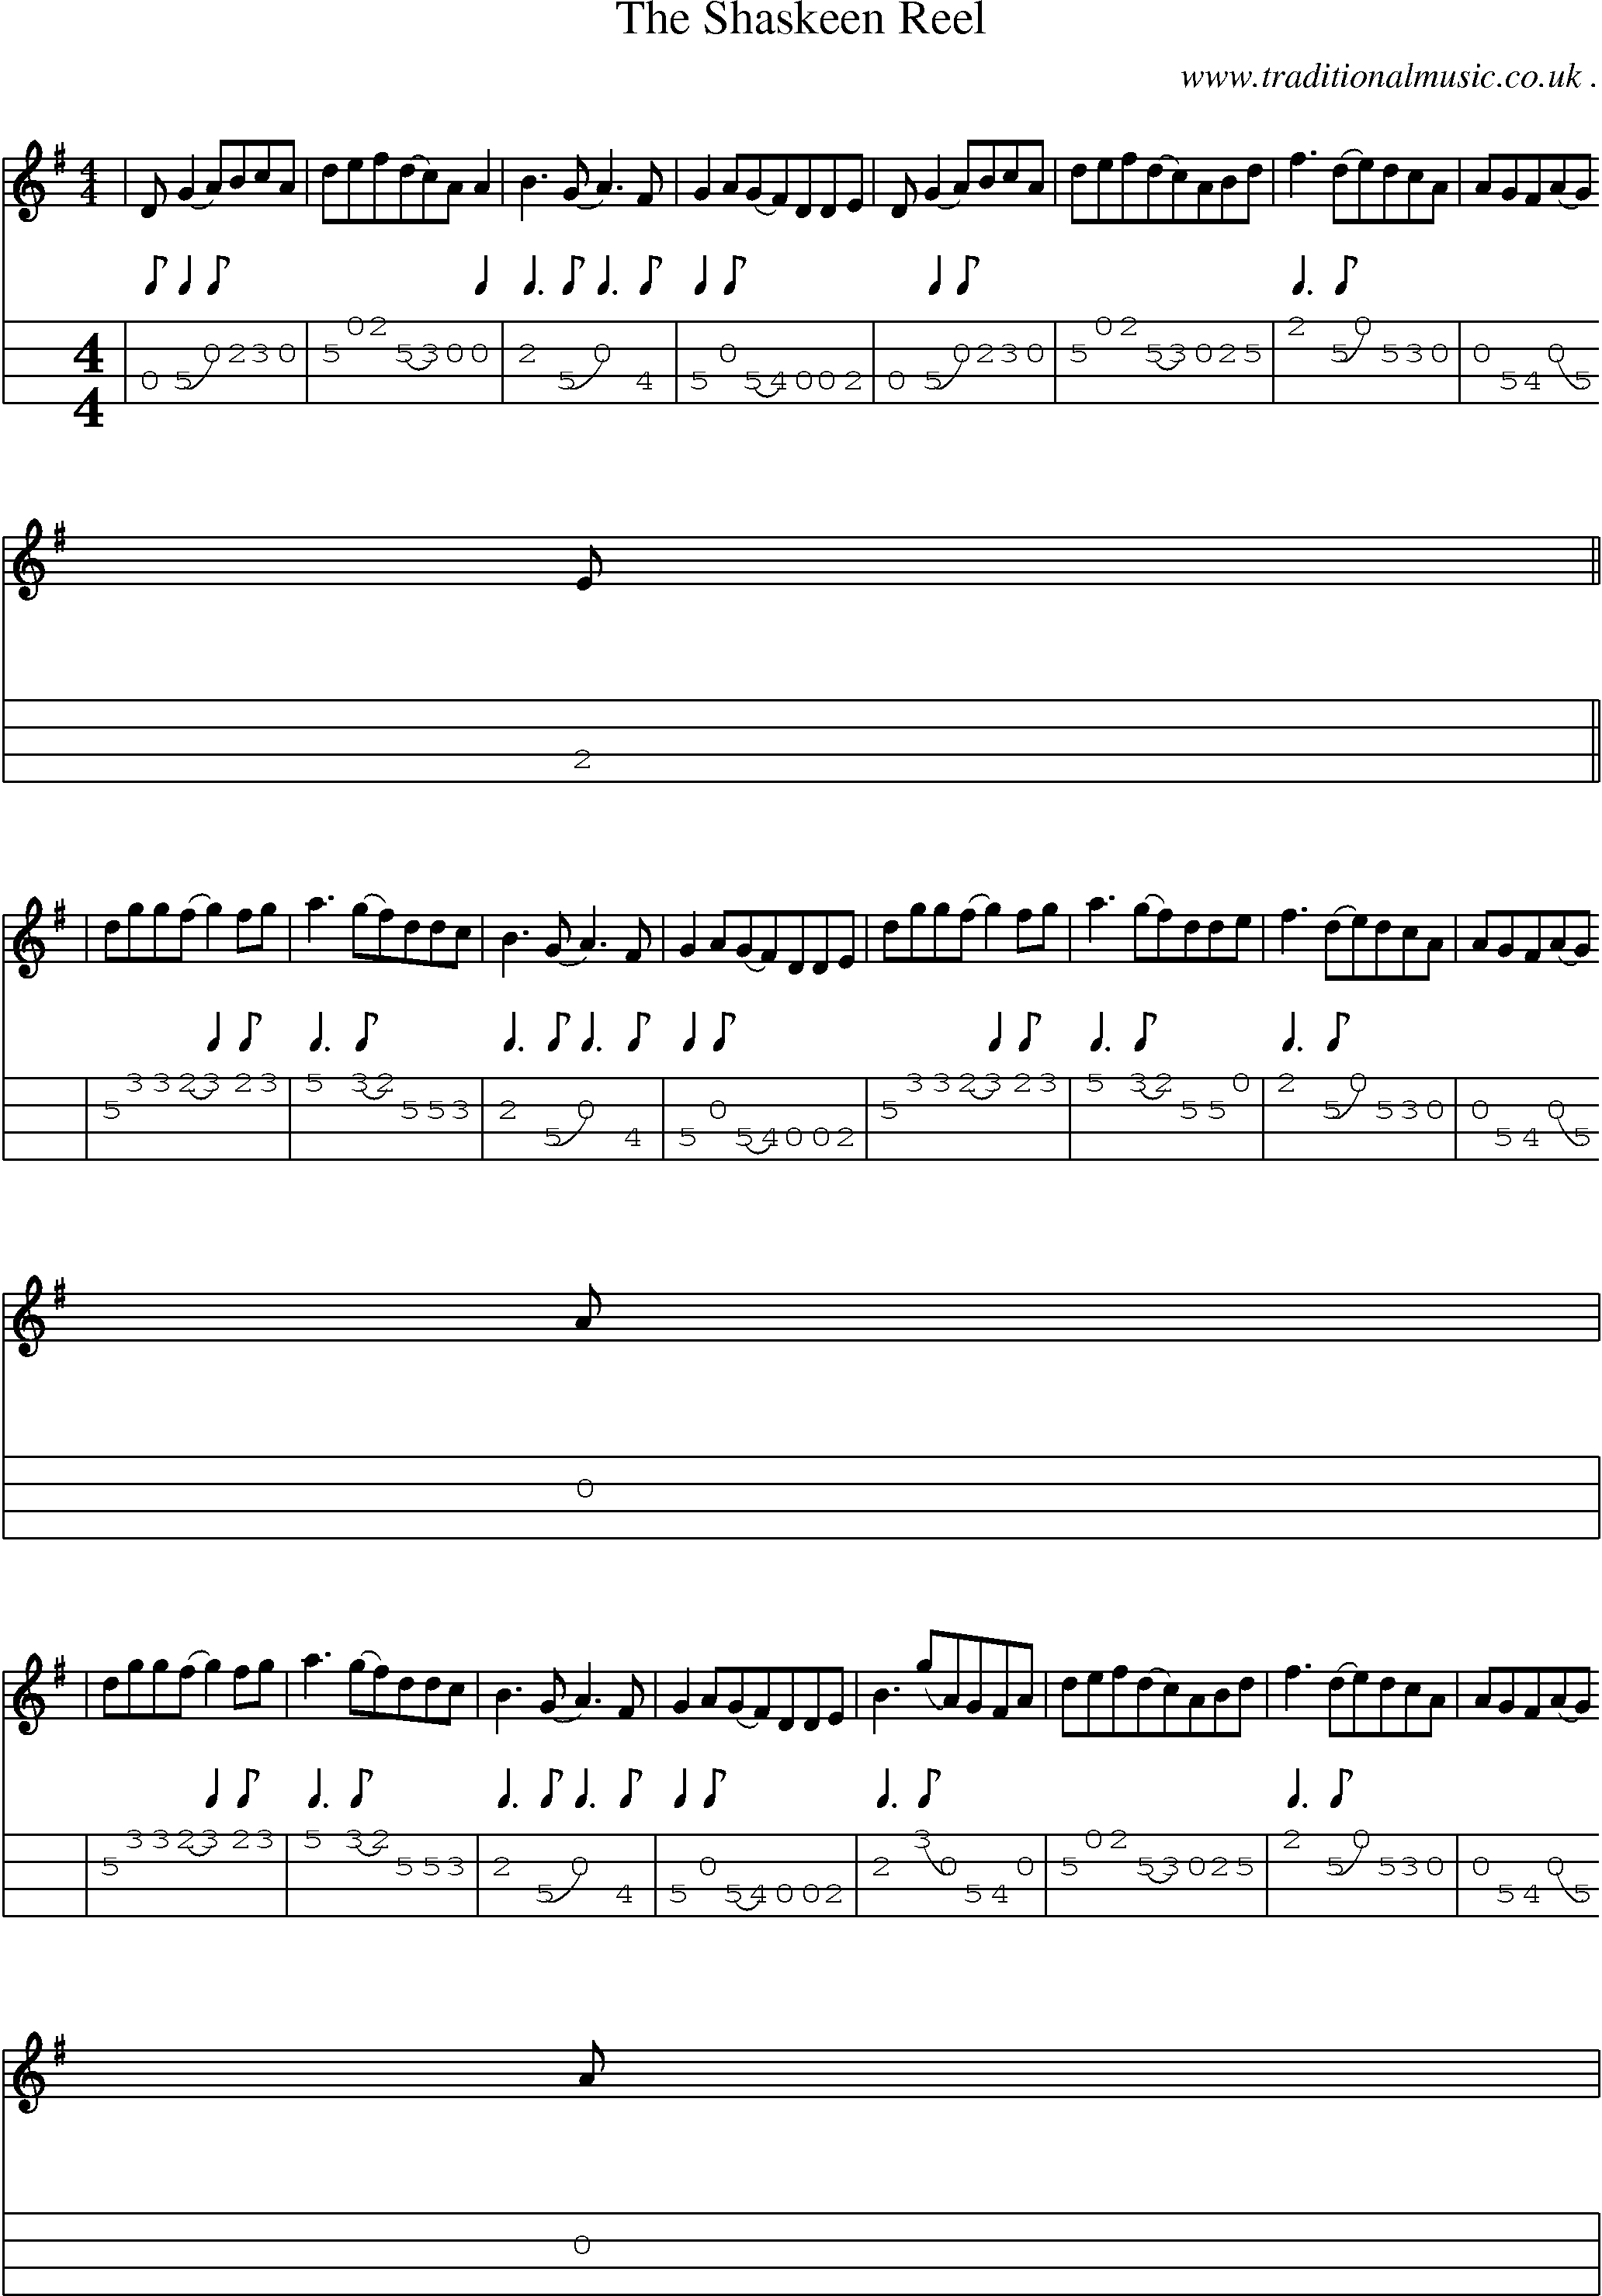 Sheet-Music and Mandolin Tabs for The Shaskeen Reel